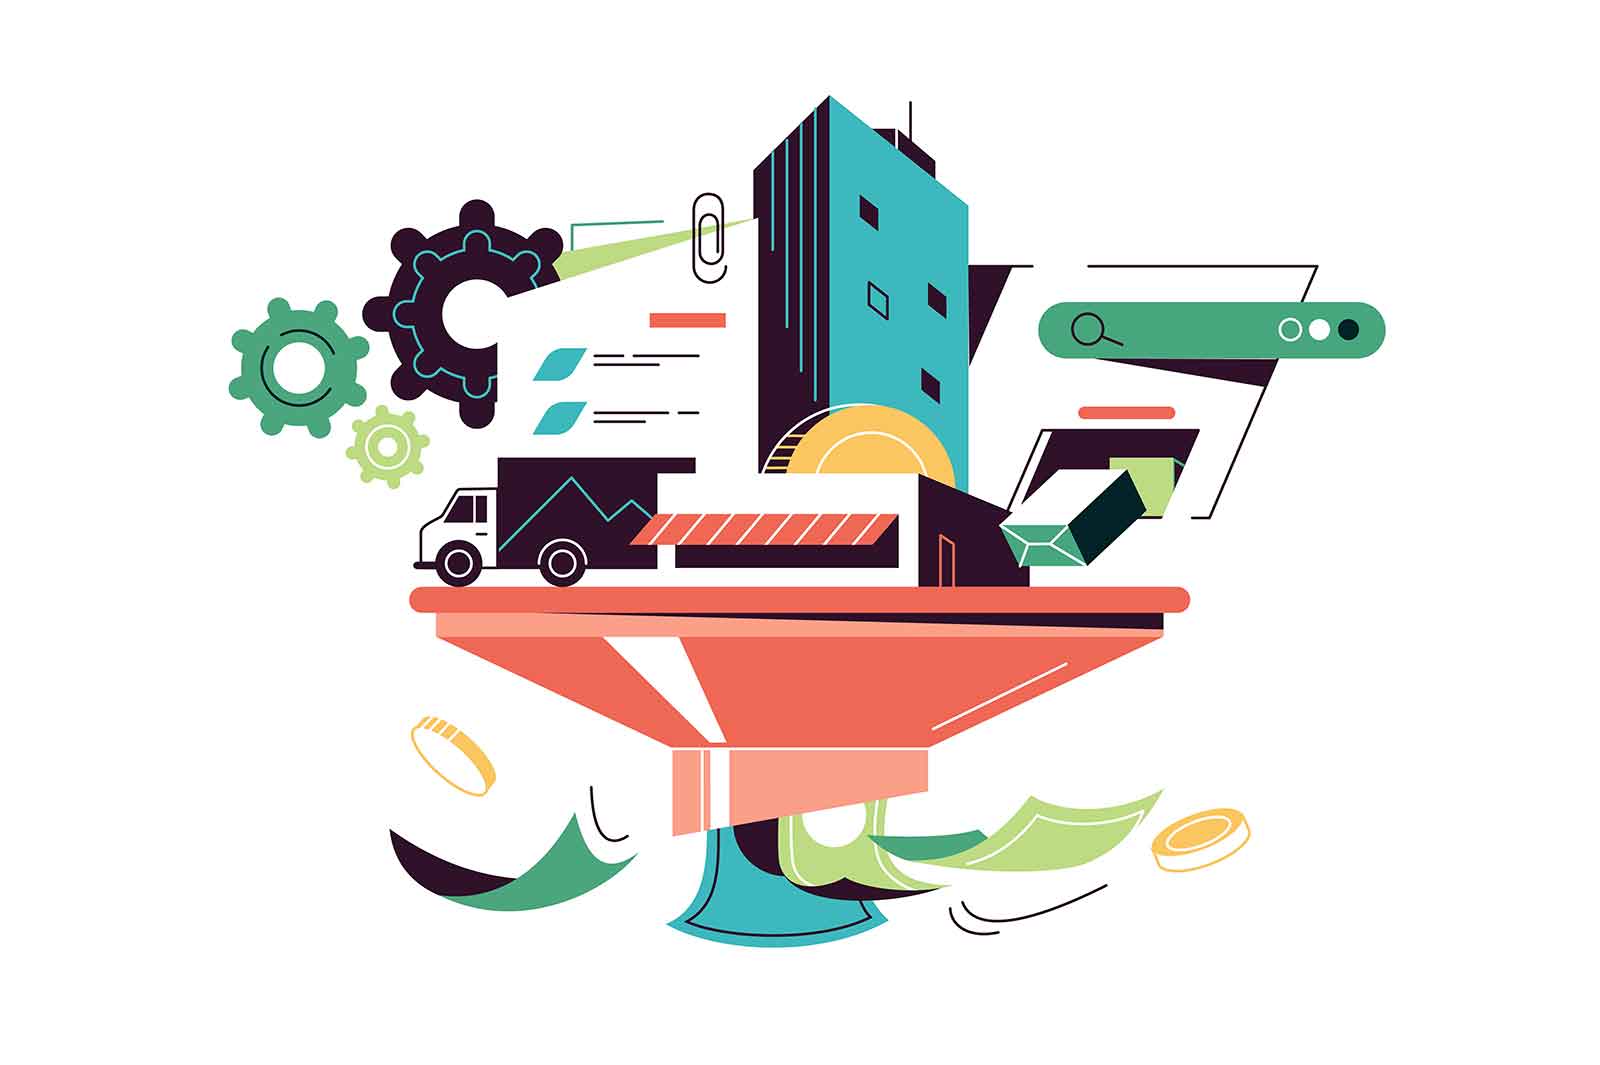 Business profit, process of generating profit concept vector illustration. Business work together to achieve financial success.